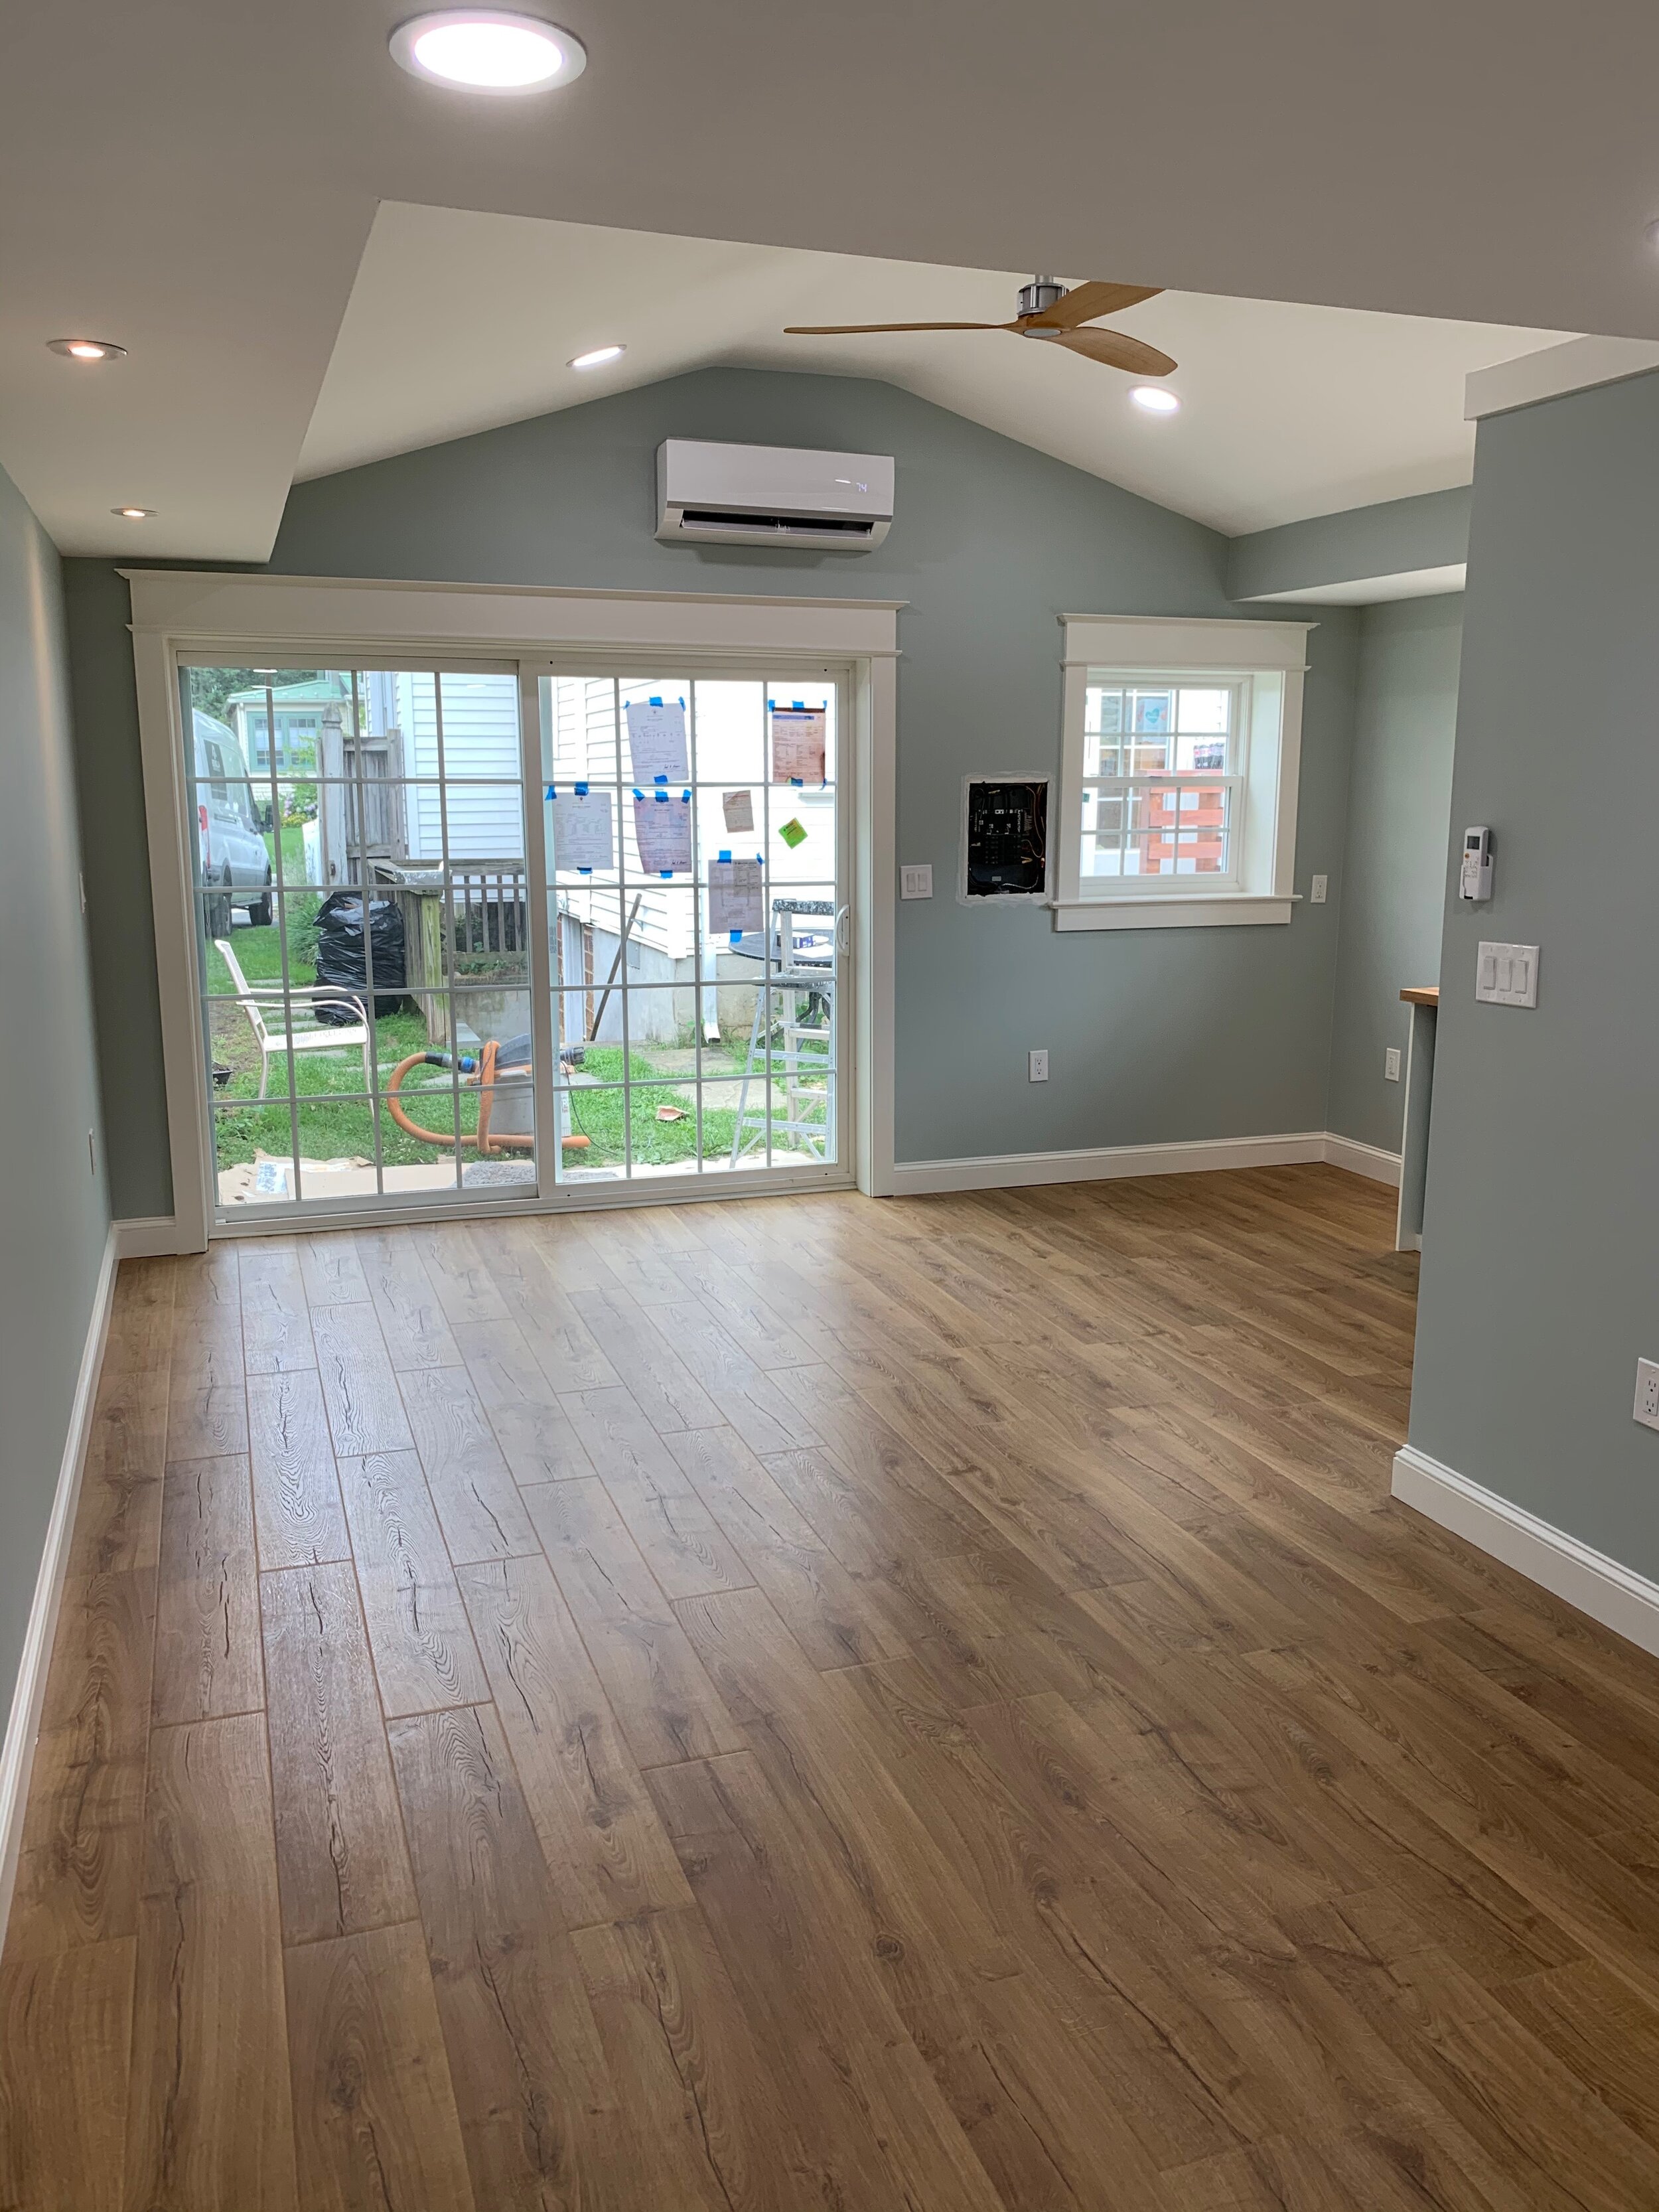  Room Remodeled: Insulation, Floors, Lights, Drywall, and Paint 